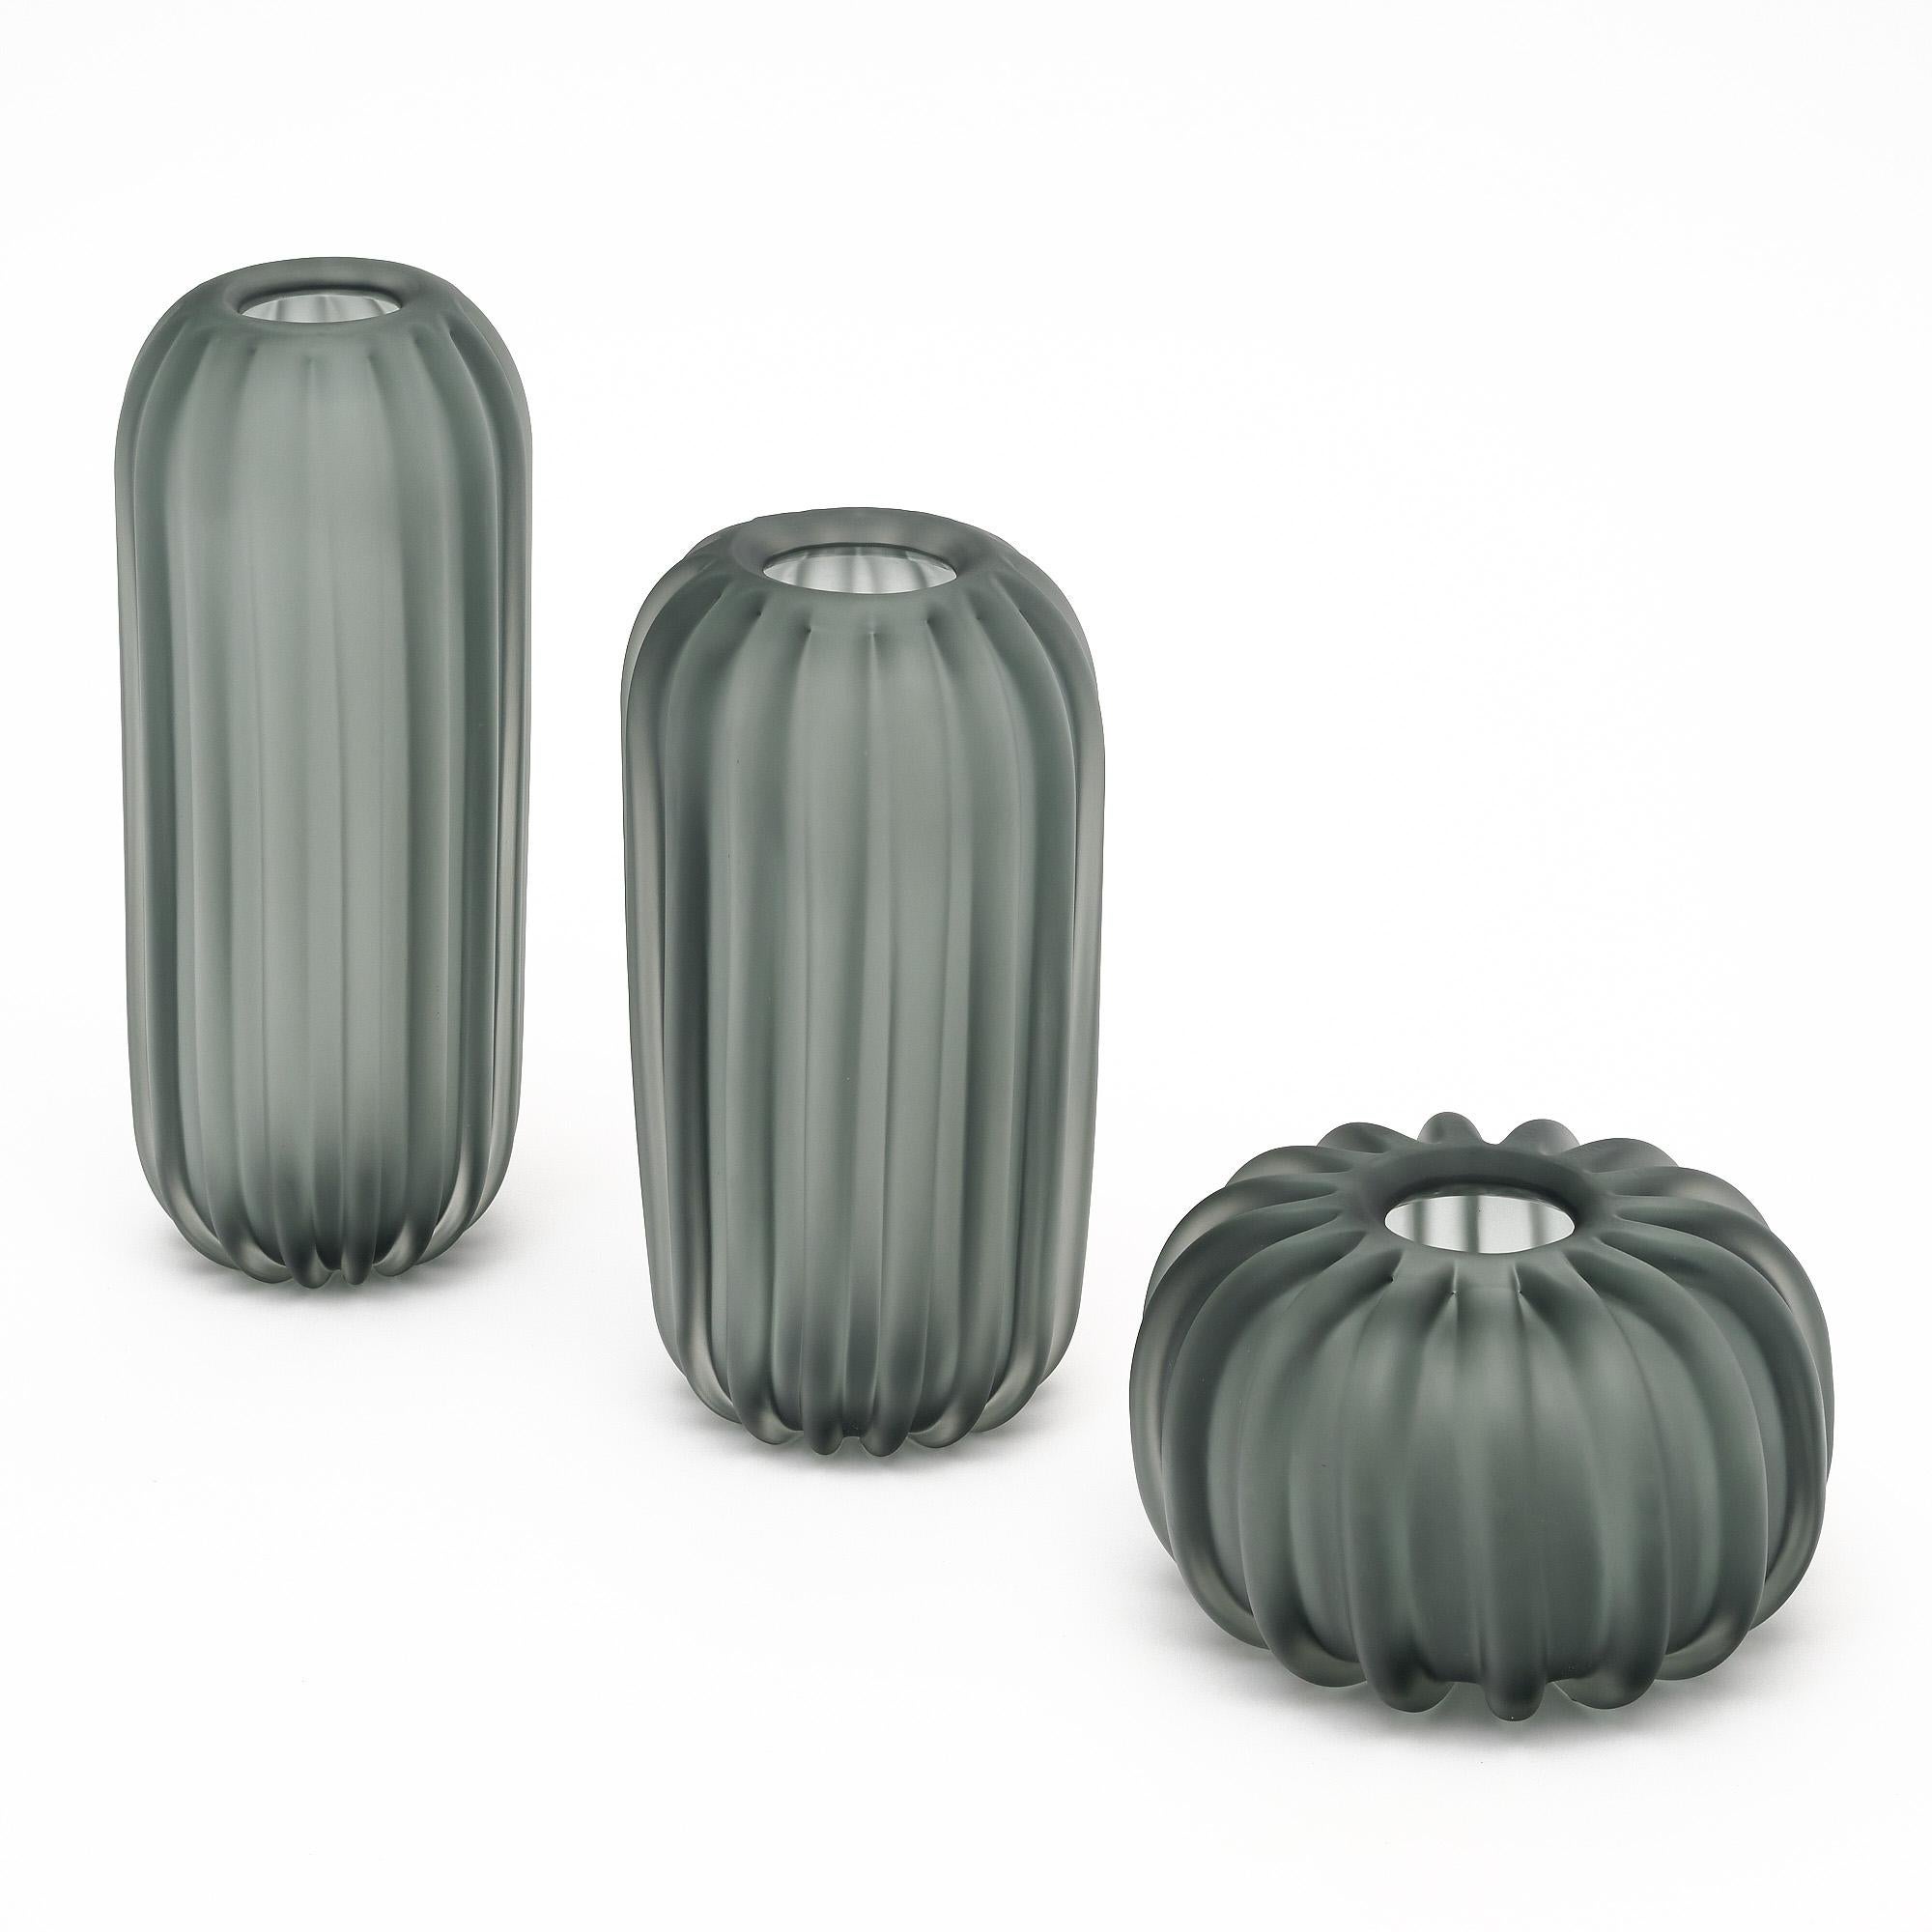 Set of three gray vases made of hand-blown Murano glass vases. Each vase differs in size, yet has the striking fluted detailing and frosted appearance that unites them.
Small vase - Diameter: 11.5” Height: 6.5”
Medium vase - Diameter: 8” Height: